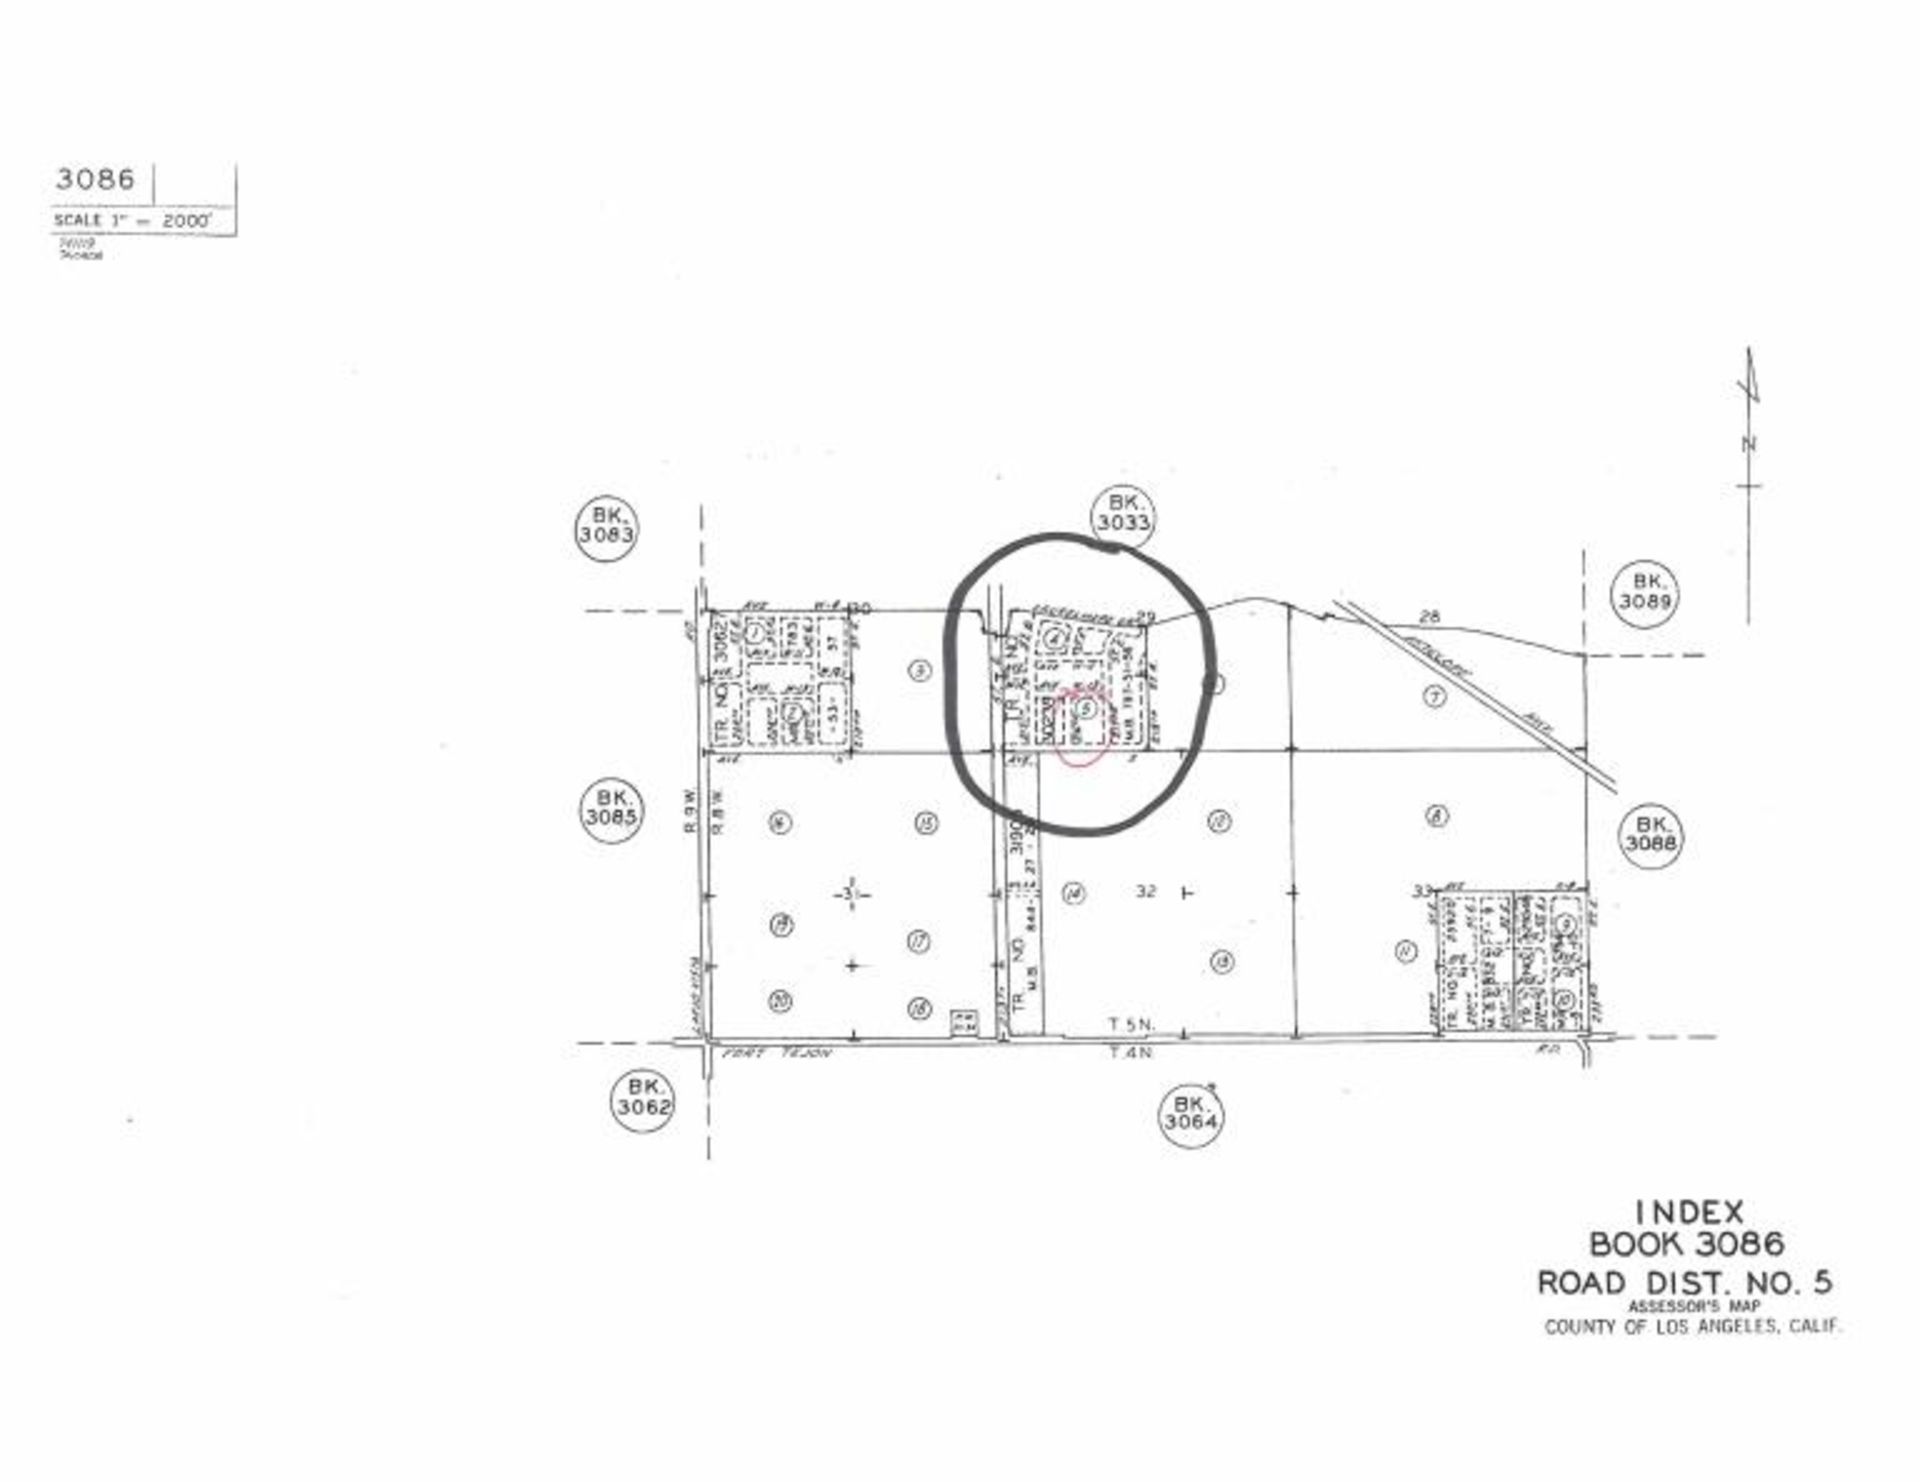 1.82 Acre Vacant Parcel near City of Lancaster, - Image 5 of 9